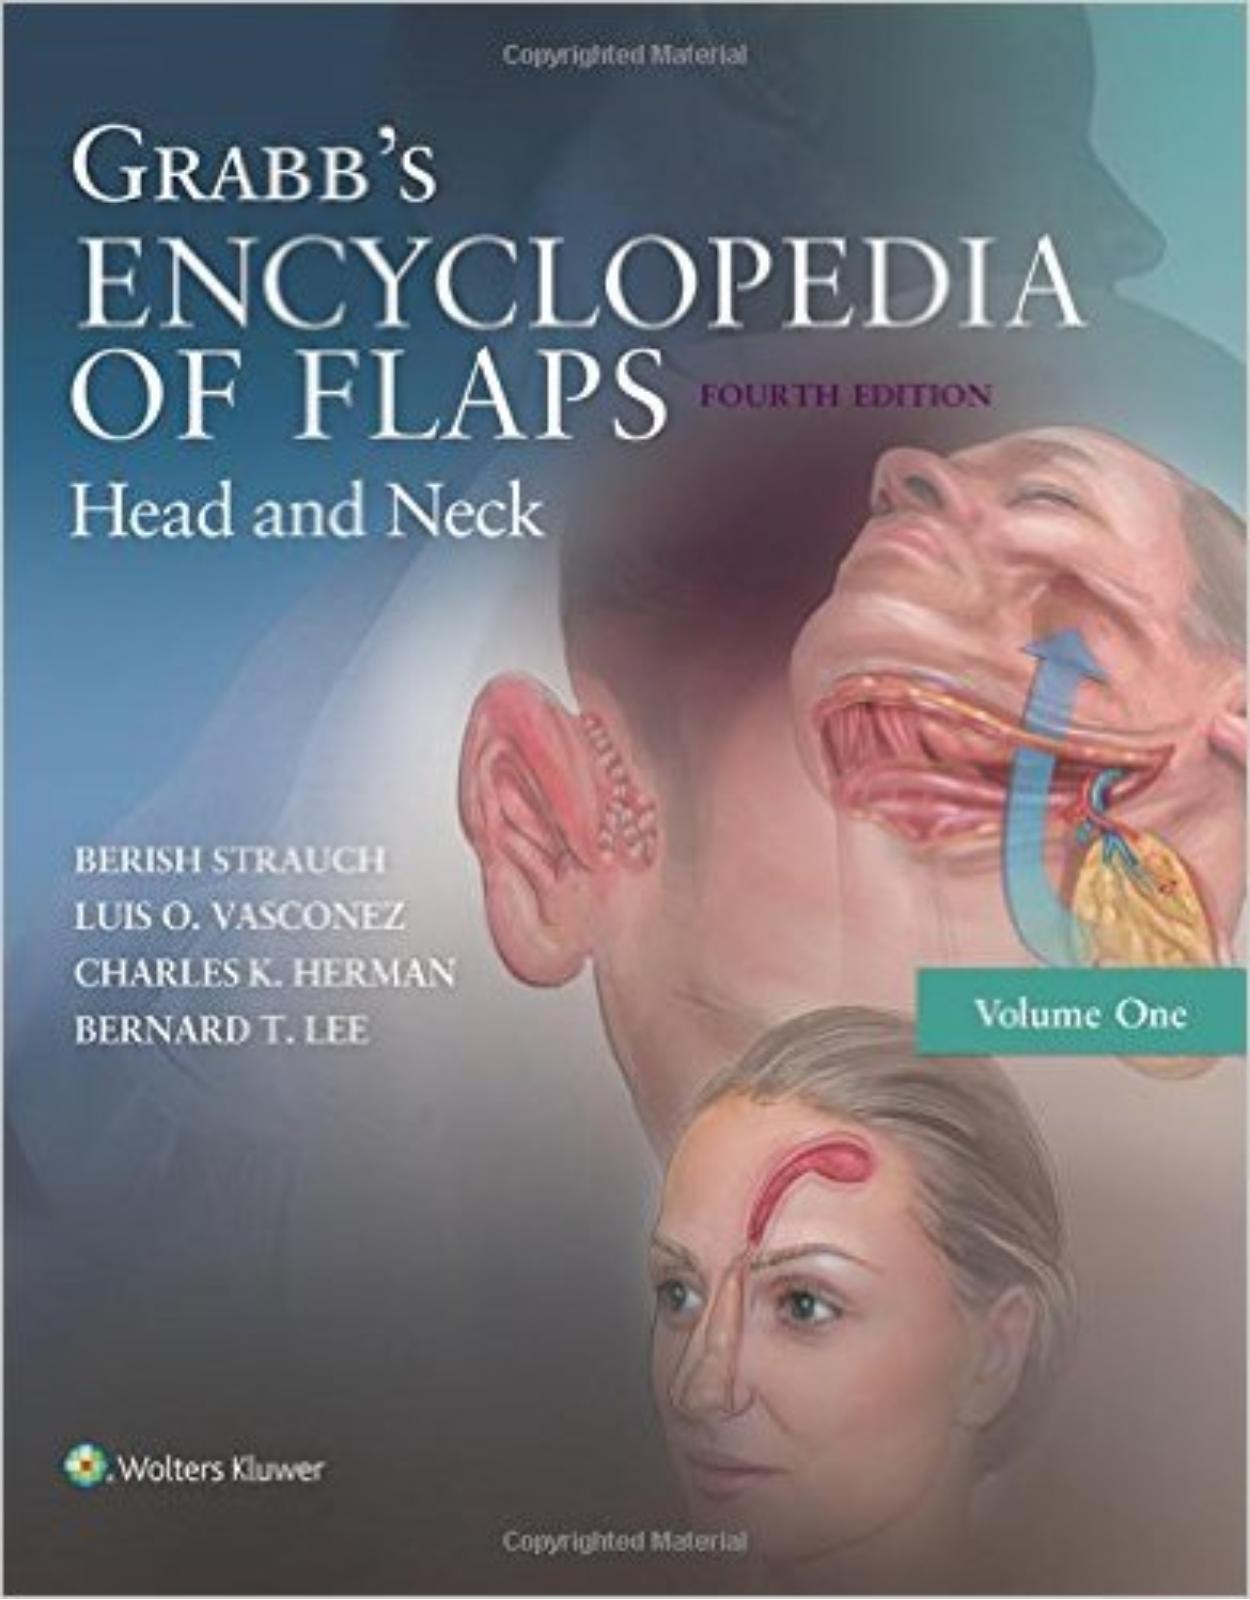 Grabb’s Encyclopedia of Flaps: Head and Neck: Volume 1